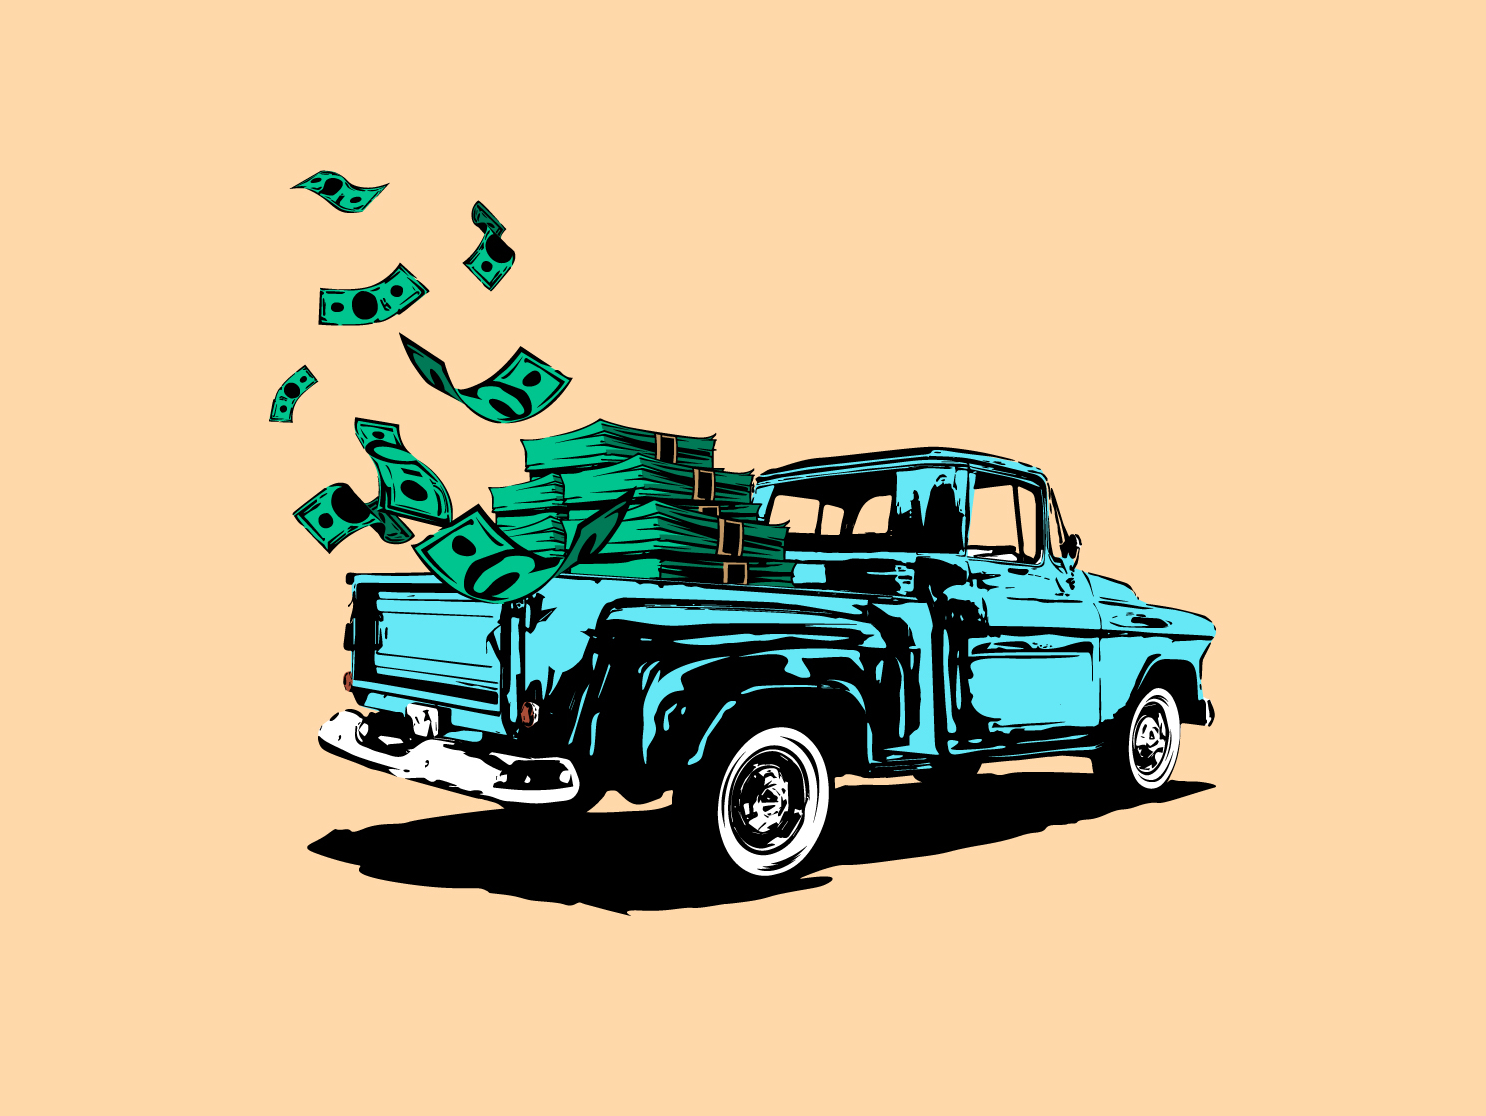 Pay Y'all! campaign currency design drawing illustration money truck vector